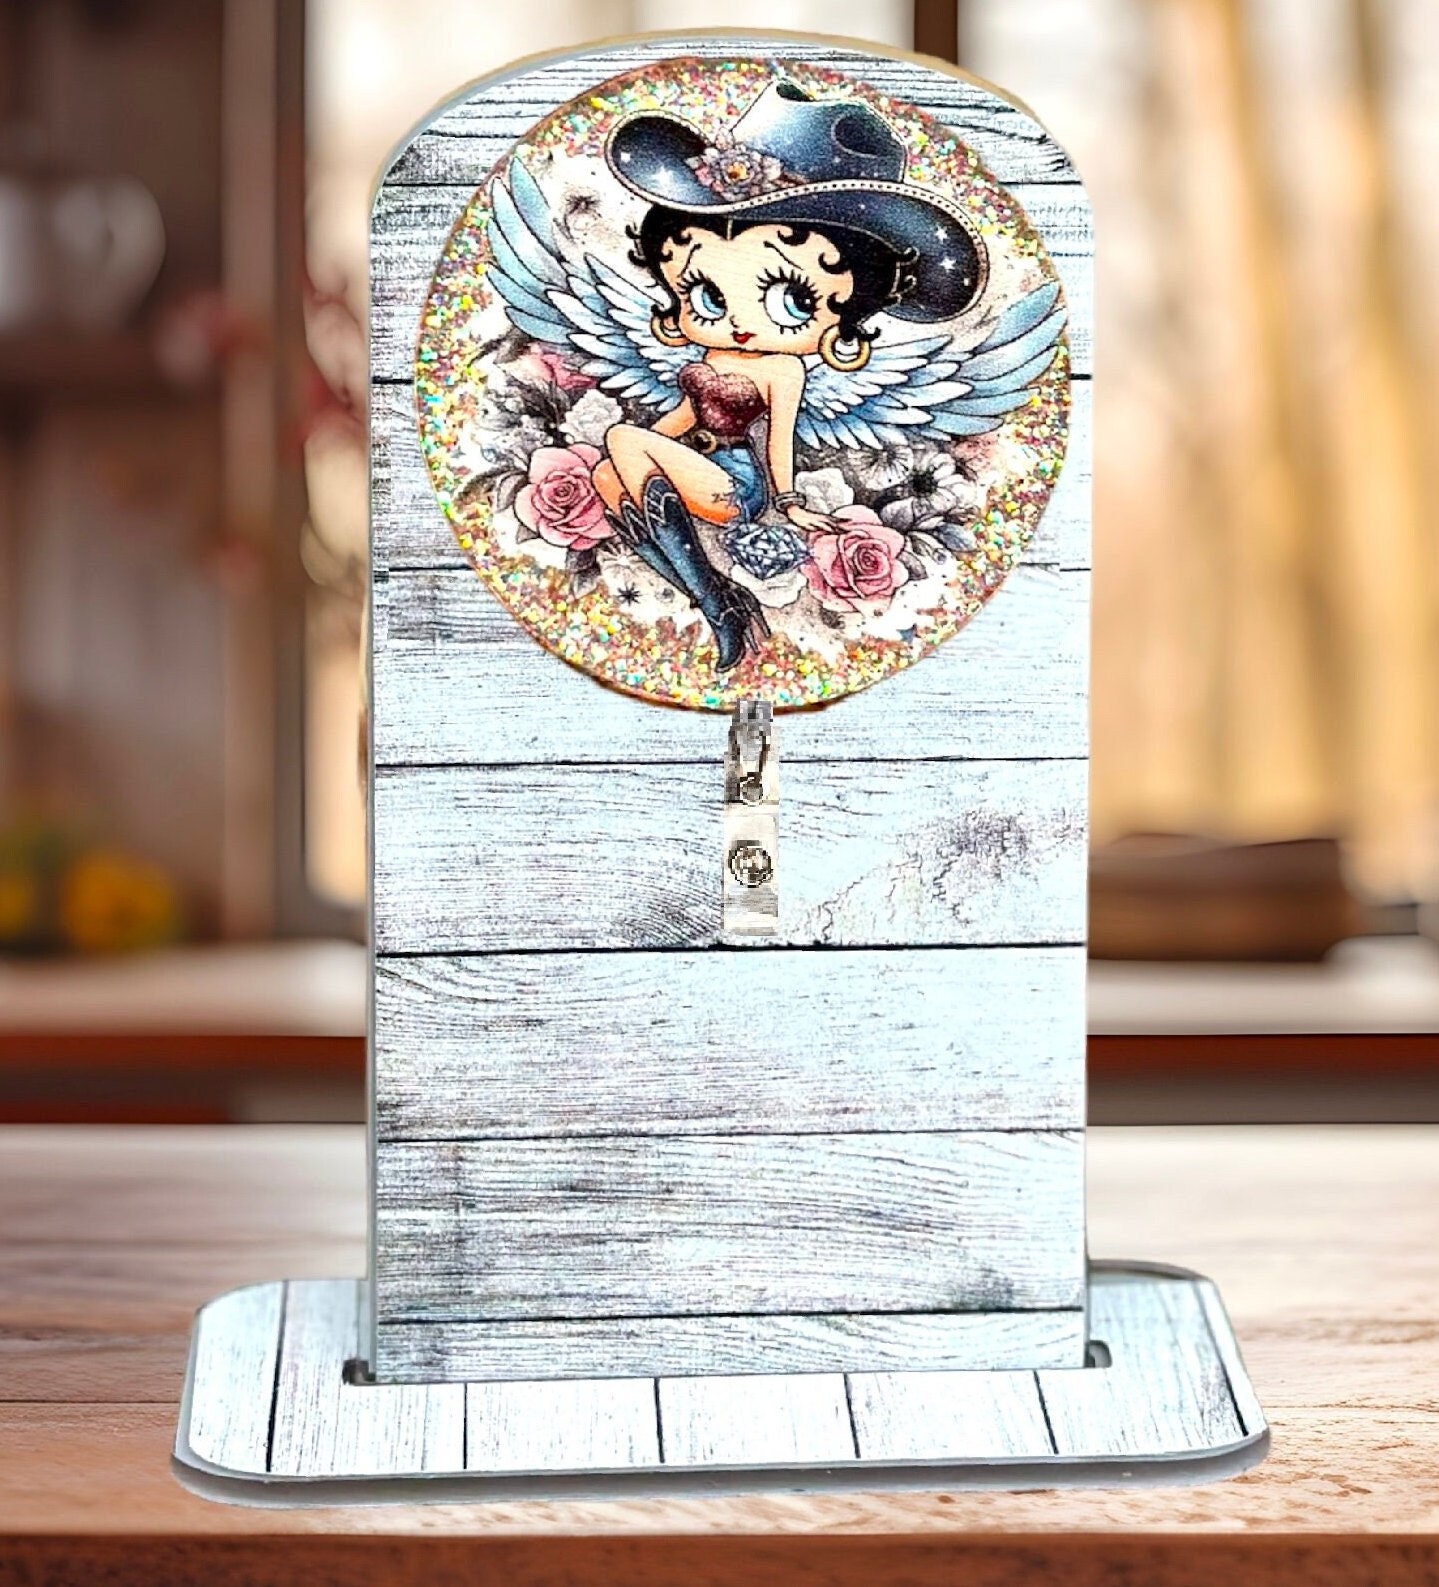 Glitter Betty Boop Badge Reel - Retractable ID Holder for Cna and HR - Cute & Sparkly